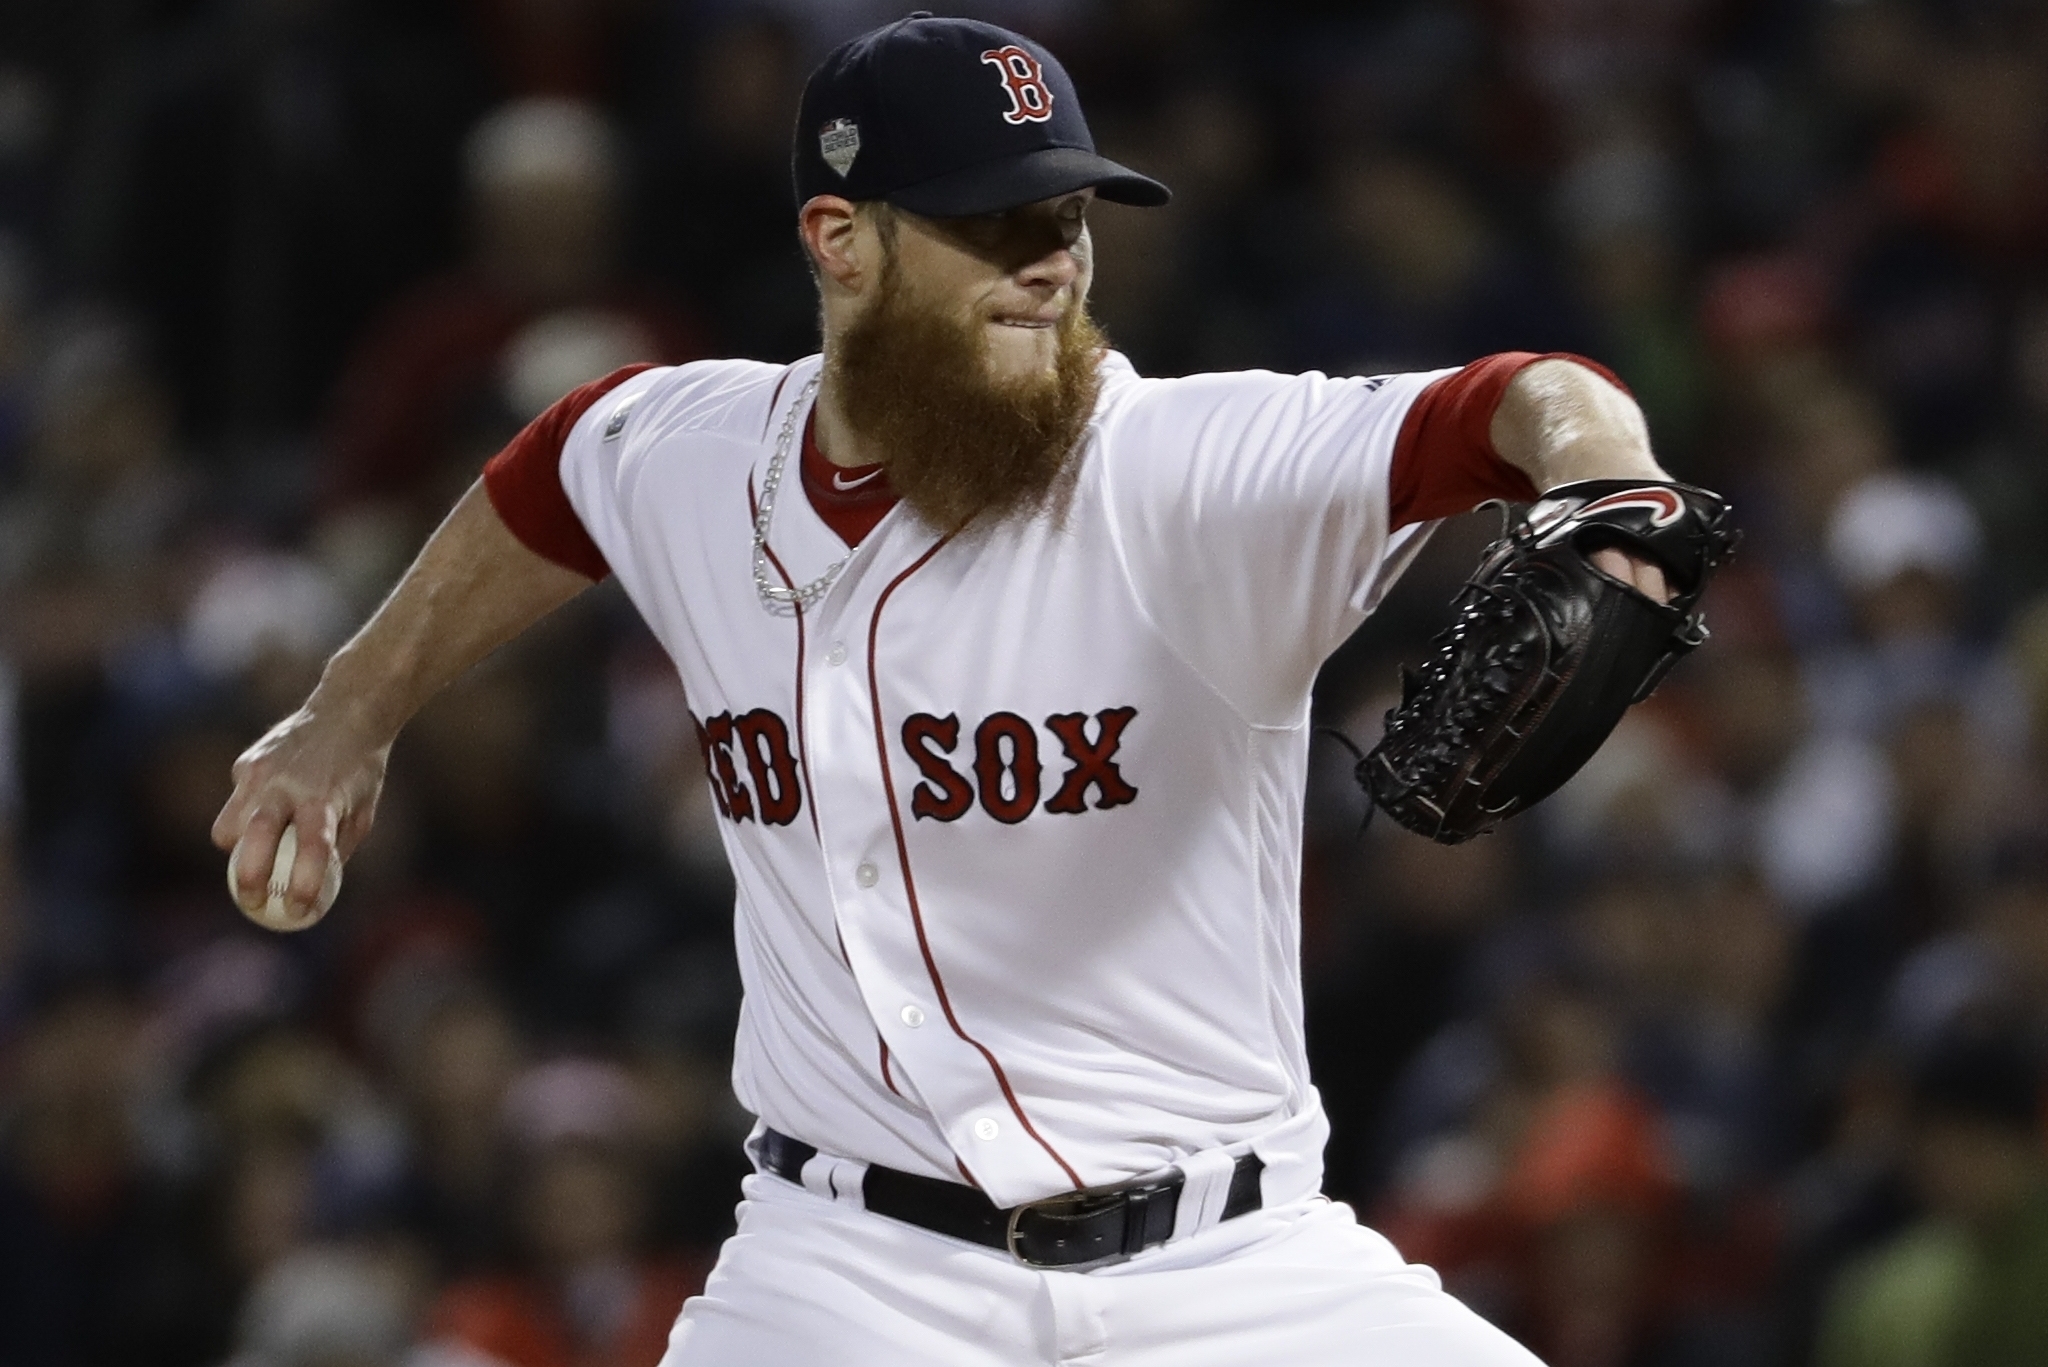 Hey! Craig Kimbrel is an All-Star too! - The Good Phight